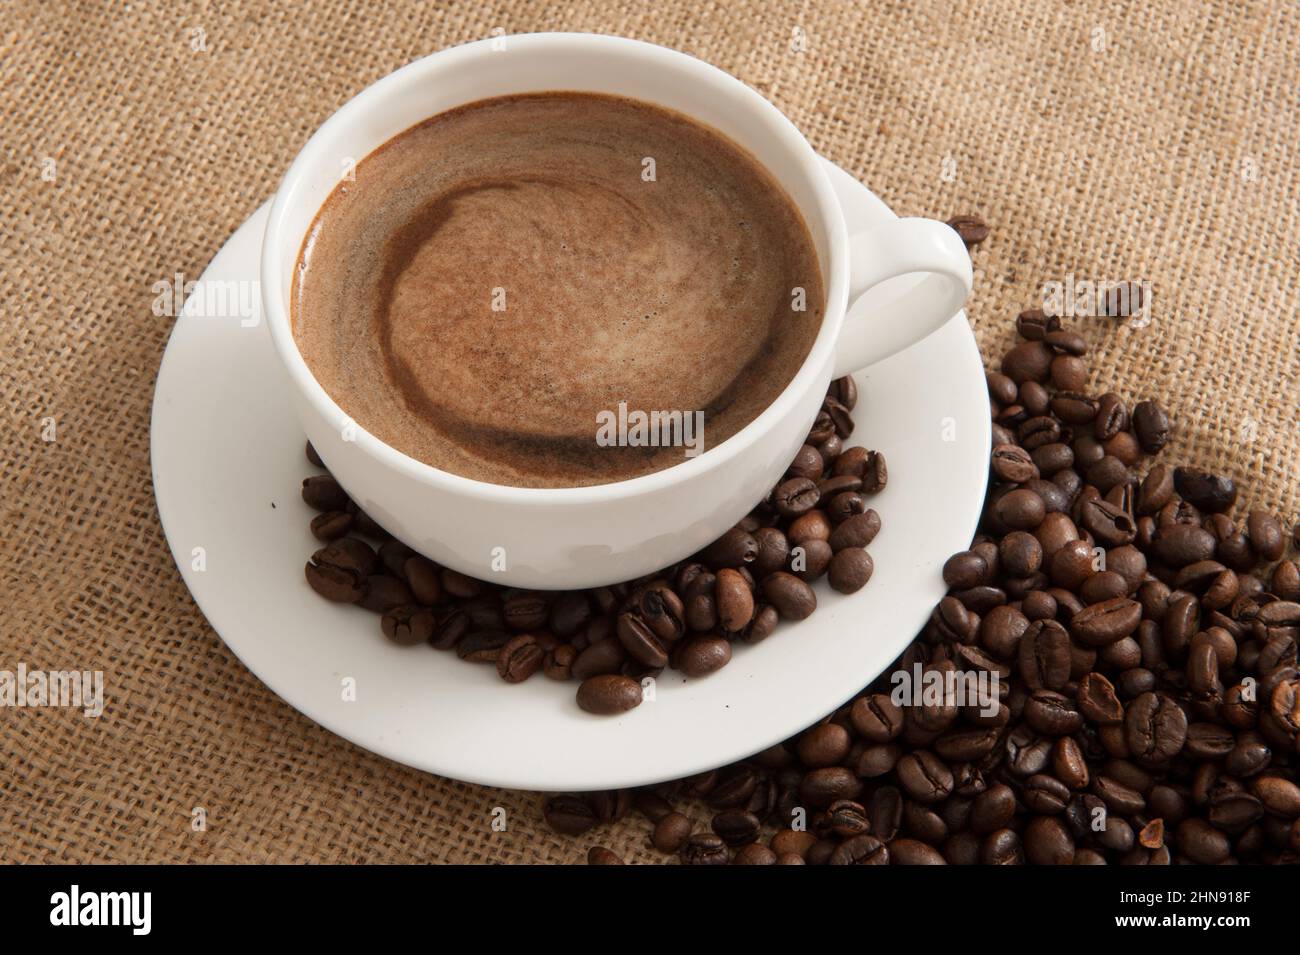 Cup with coffee and coffee beans and steam over cup on burlap background Stock Photo